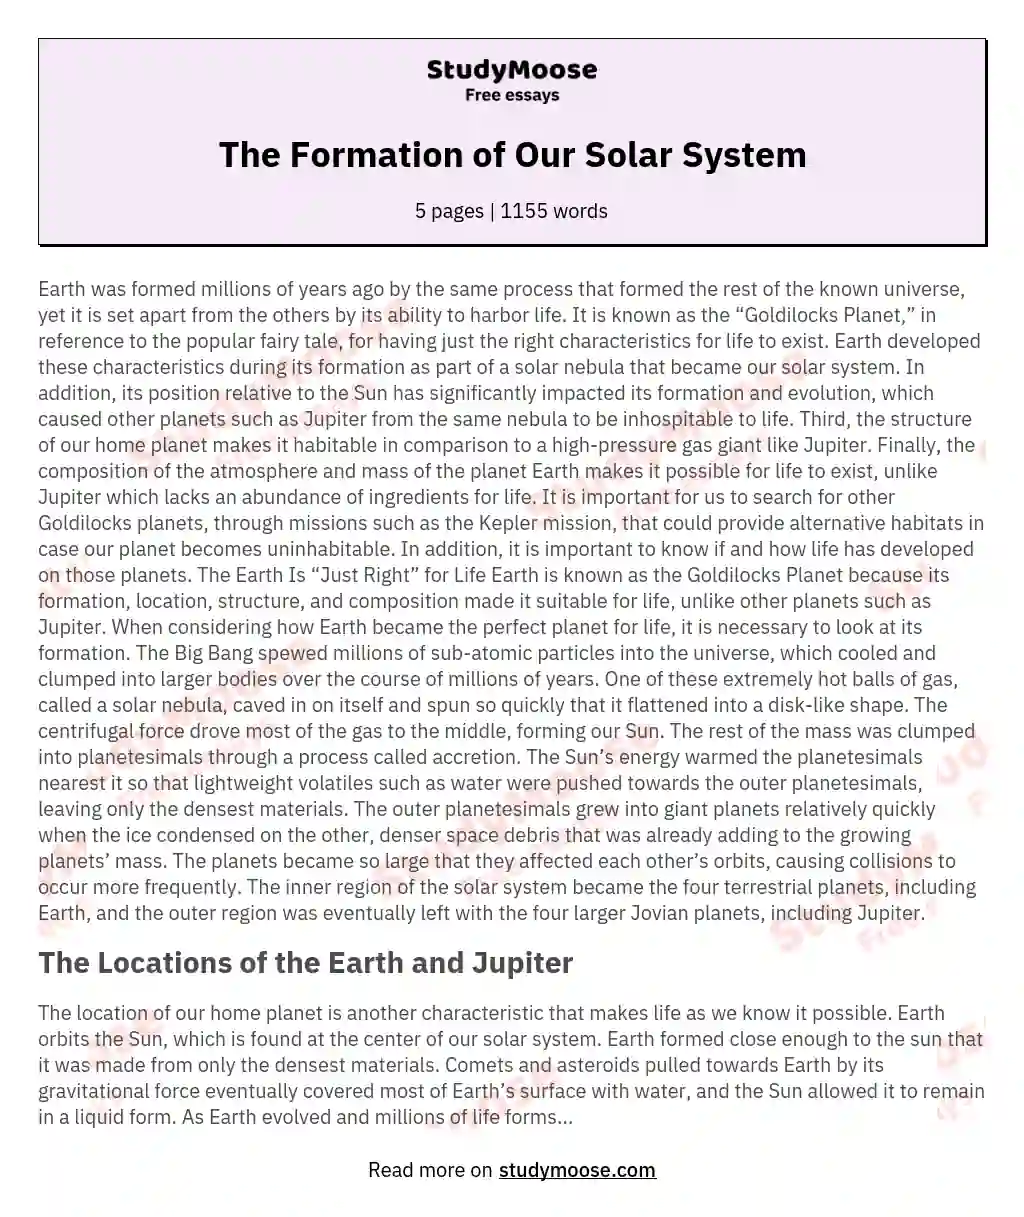 The Formation of Our Solar System essay